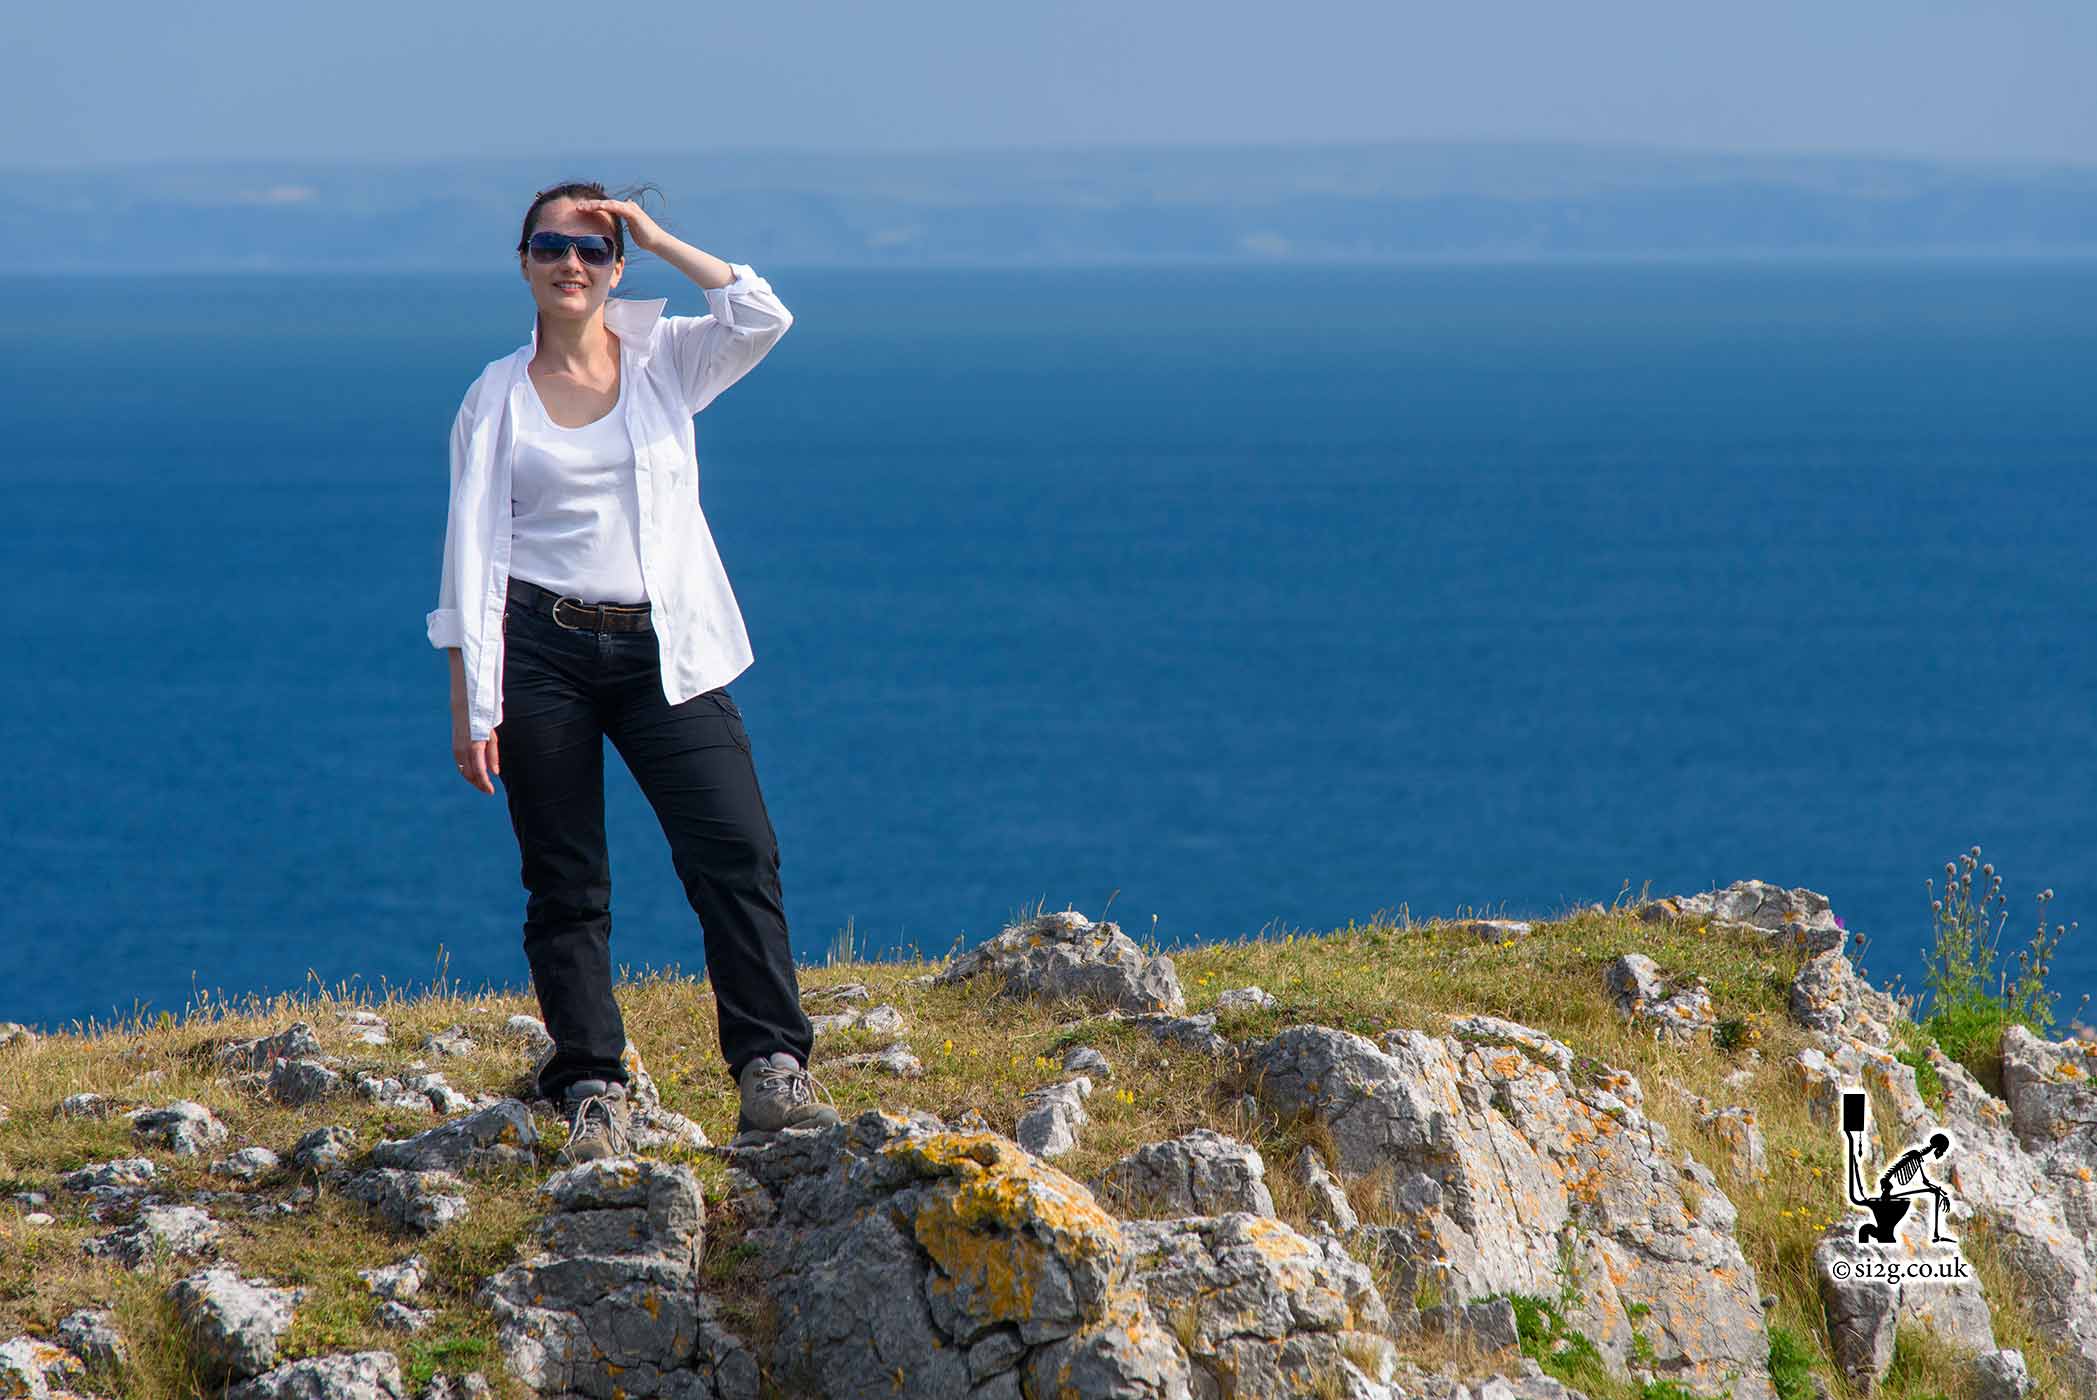 Cliff Top-Recce - Daria searches out cliff-top locations for a tourism photo shoot.  This is part of the Welsh coastal path and is a lovely location during the summer.